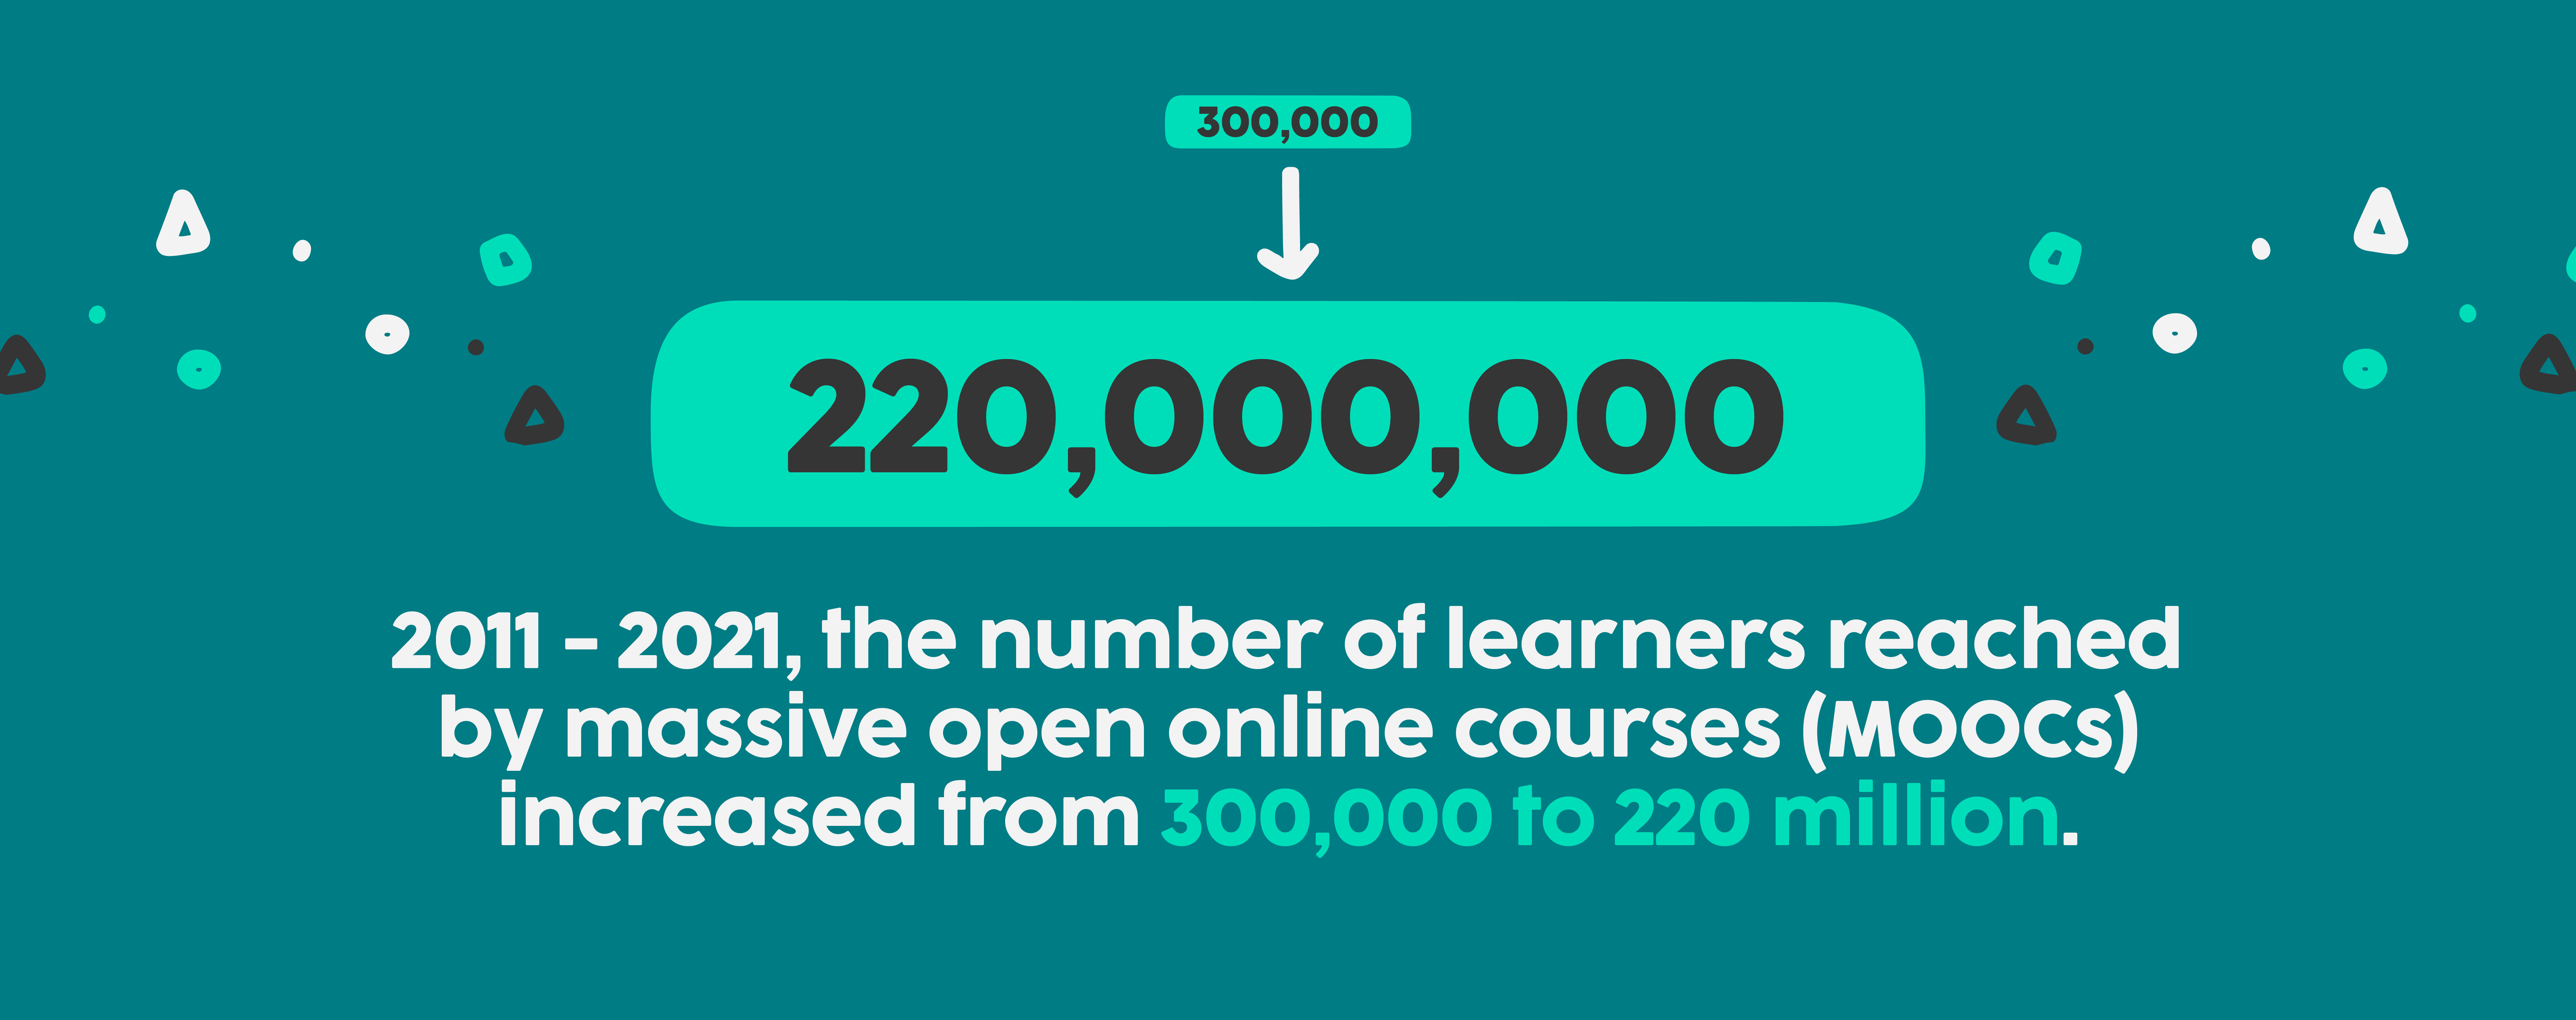 The eLearning market is competitive and growing. From 2011 to 2021, the number of learners reached by massive open online courses (MOOCs) increased from 300,000 to 220 million.